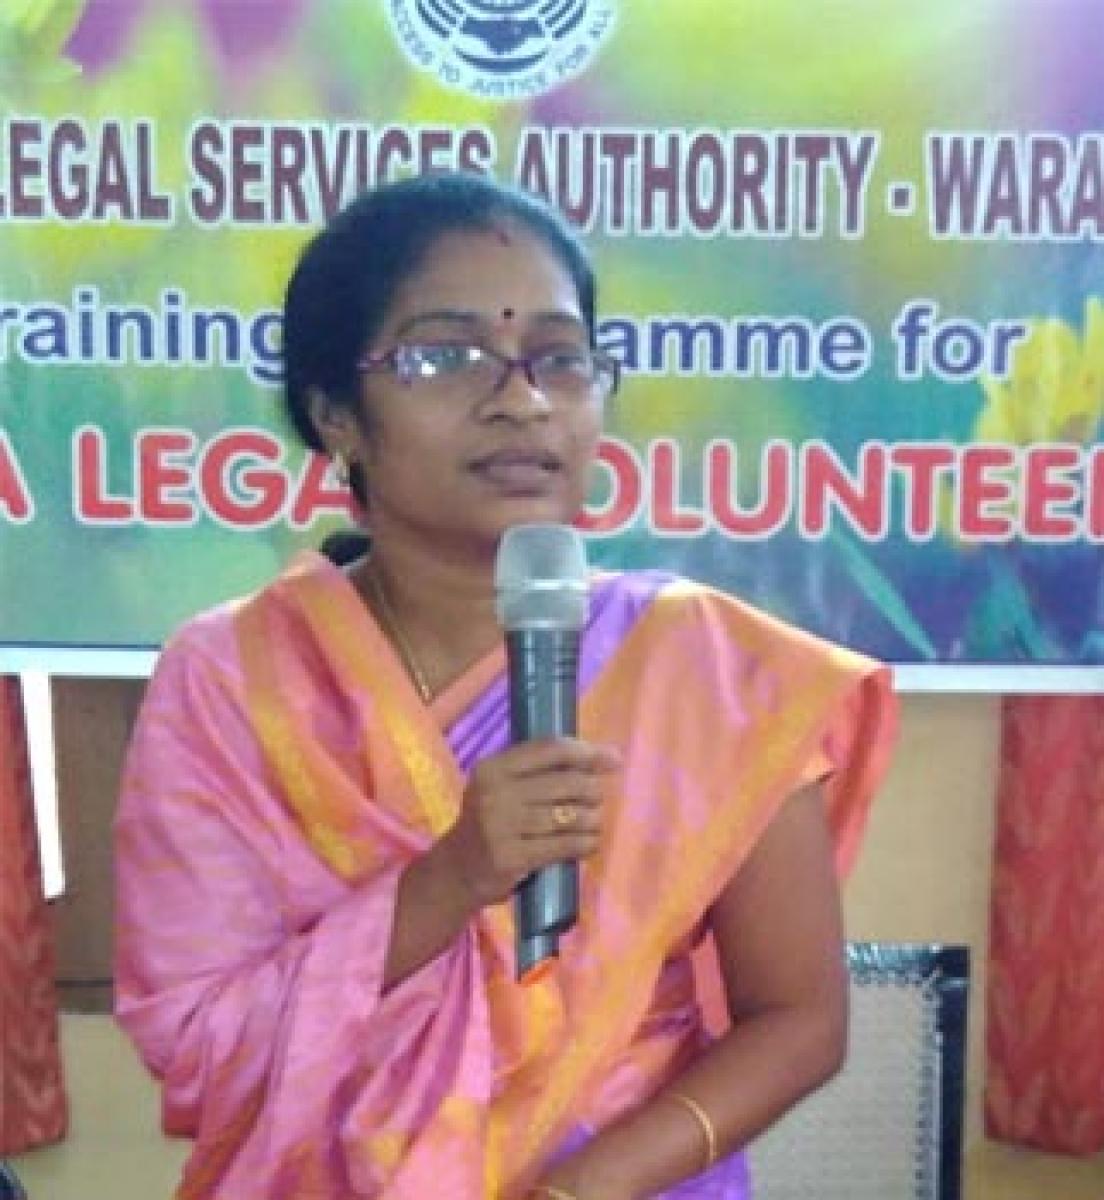 District Legal Services Authority secretary tells para-legal volunteers to be active